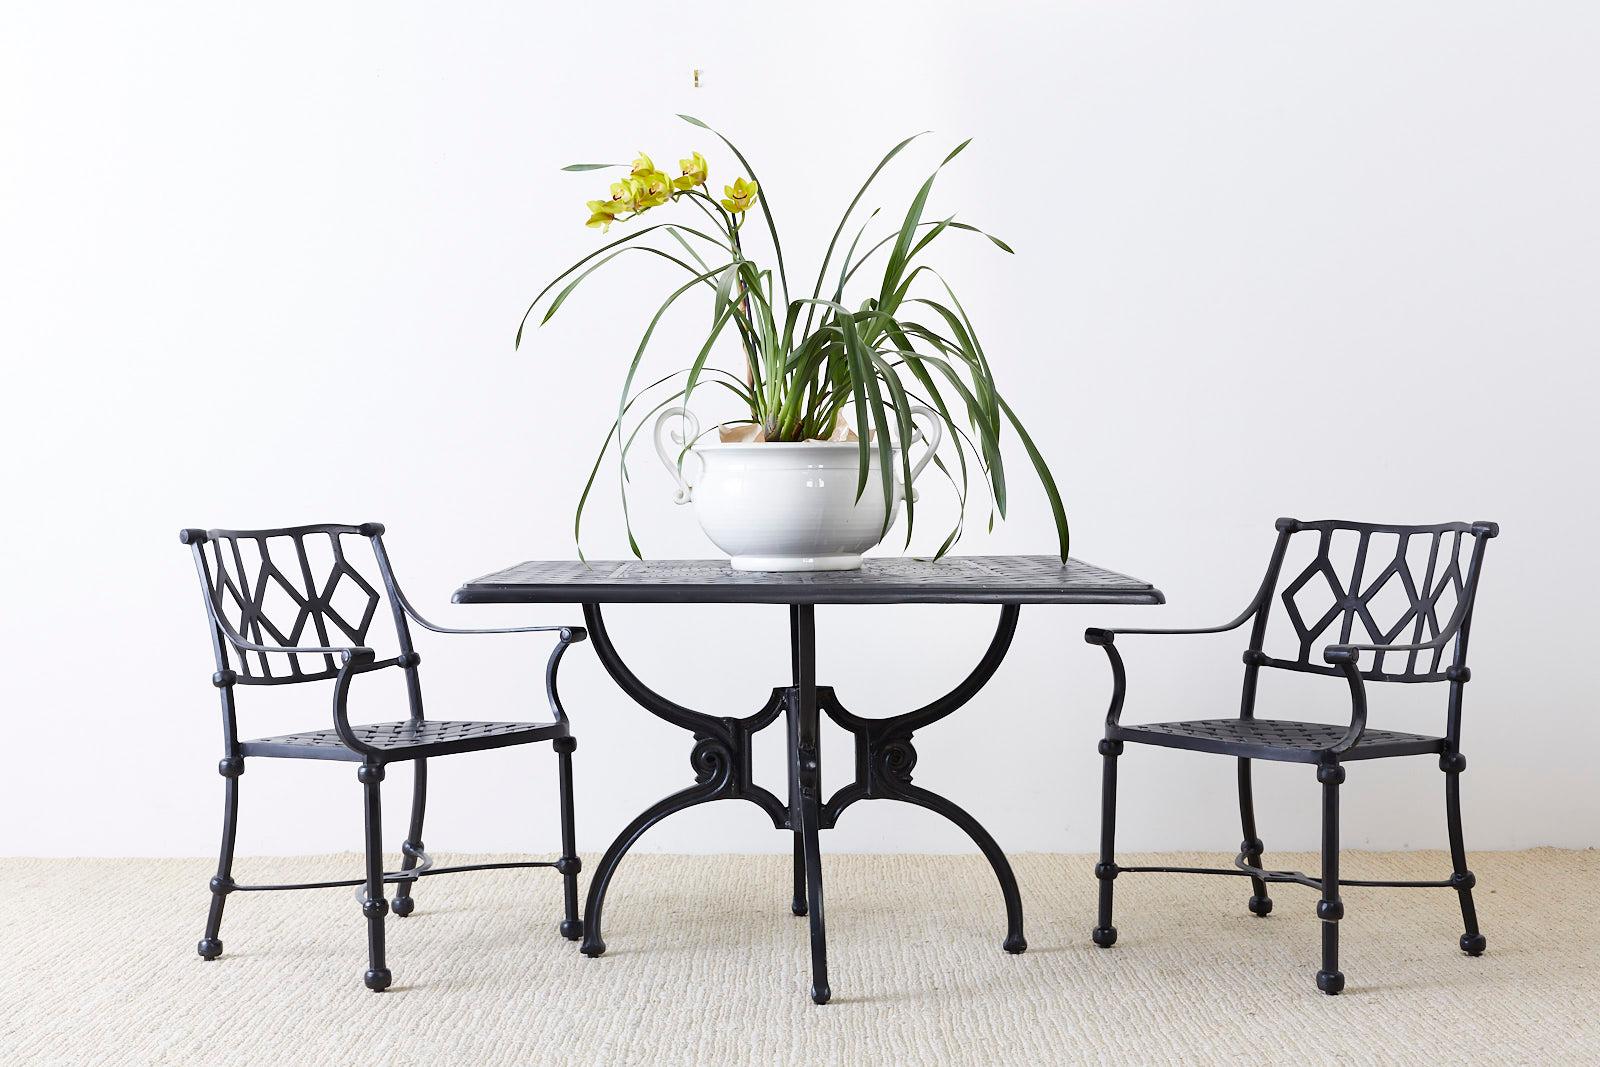 Impressive patio and garden dining table made in the manner and style of Molla. Constructed from ebonized cast aluminium in the neoclassical taste. Features a woven design top with decorative floral foliate motif in the center. Supported by thick